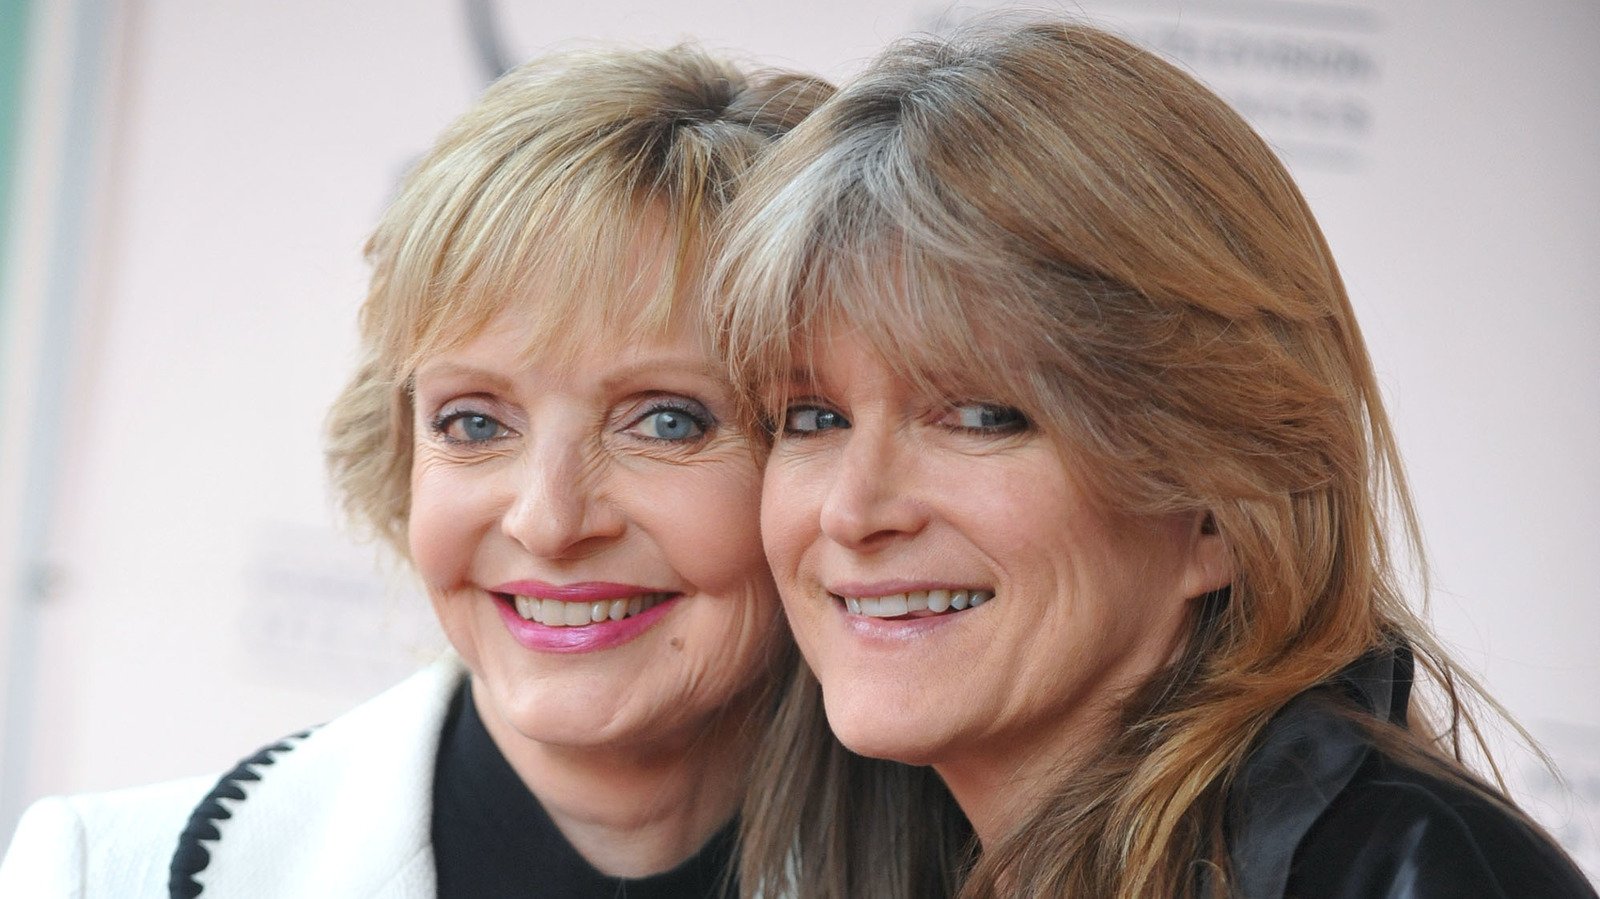 Inside The Time Florence Henderson Saved Her On-Screen Daughter's Life